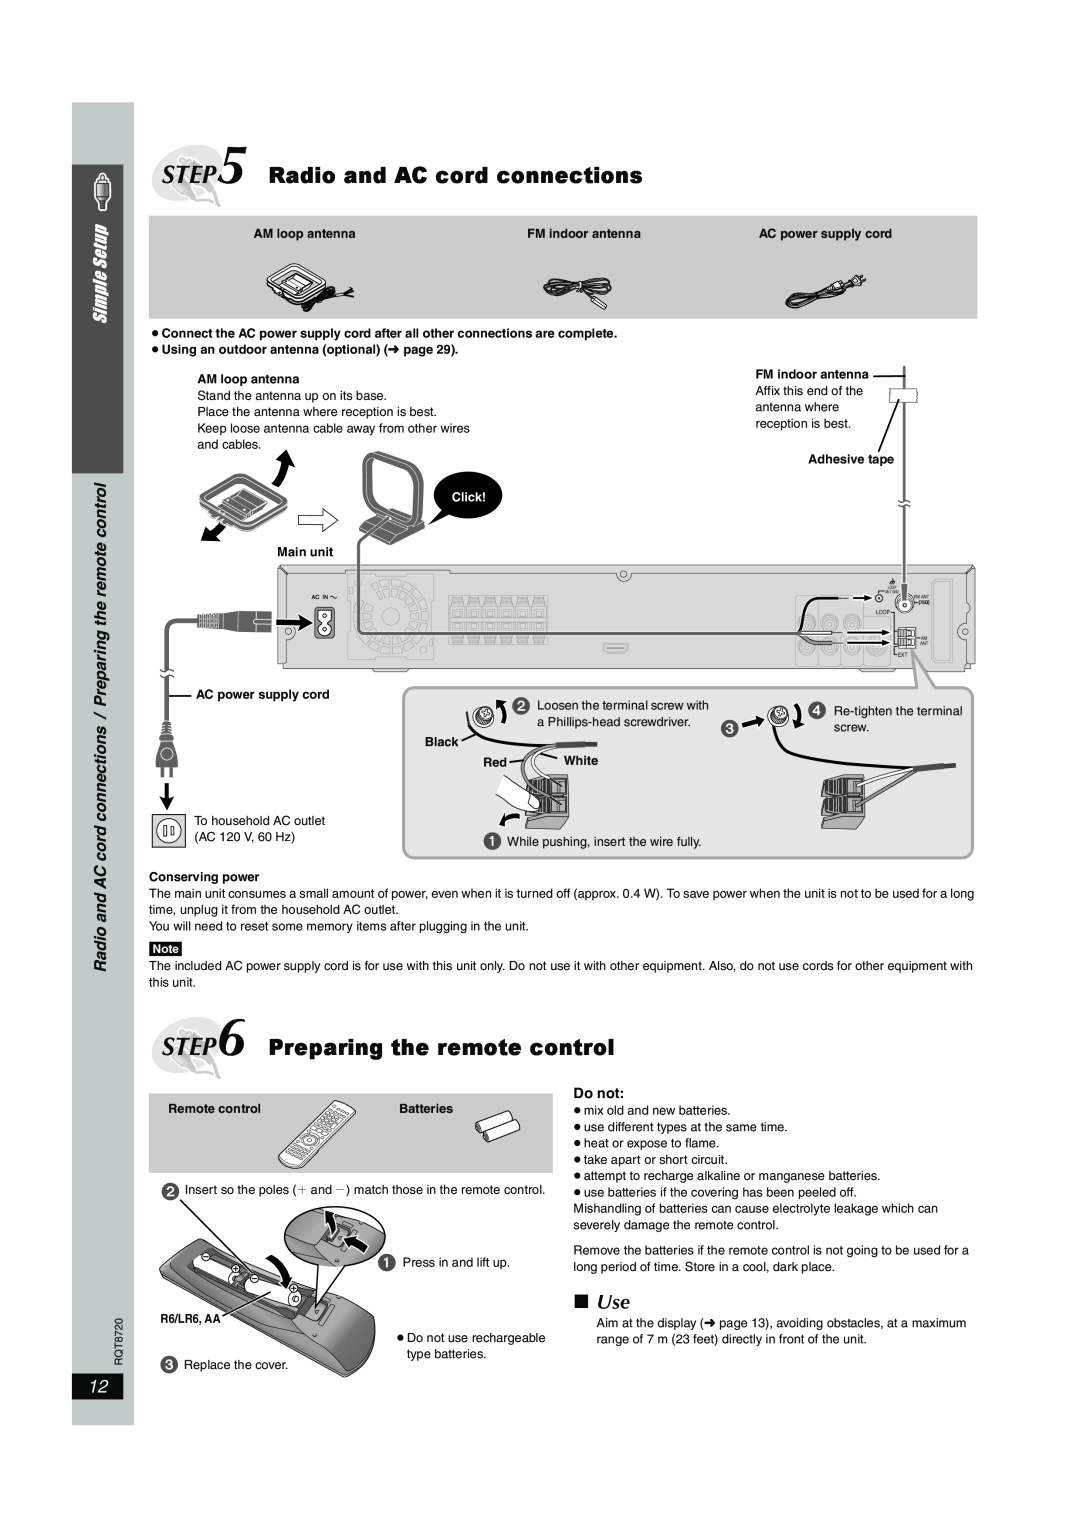 Panasonic SC-HT744 Radio and AC cord connections, Preparing the remote control, Use, Simple Setup, Do not 